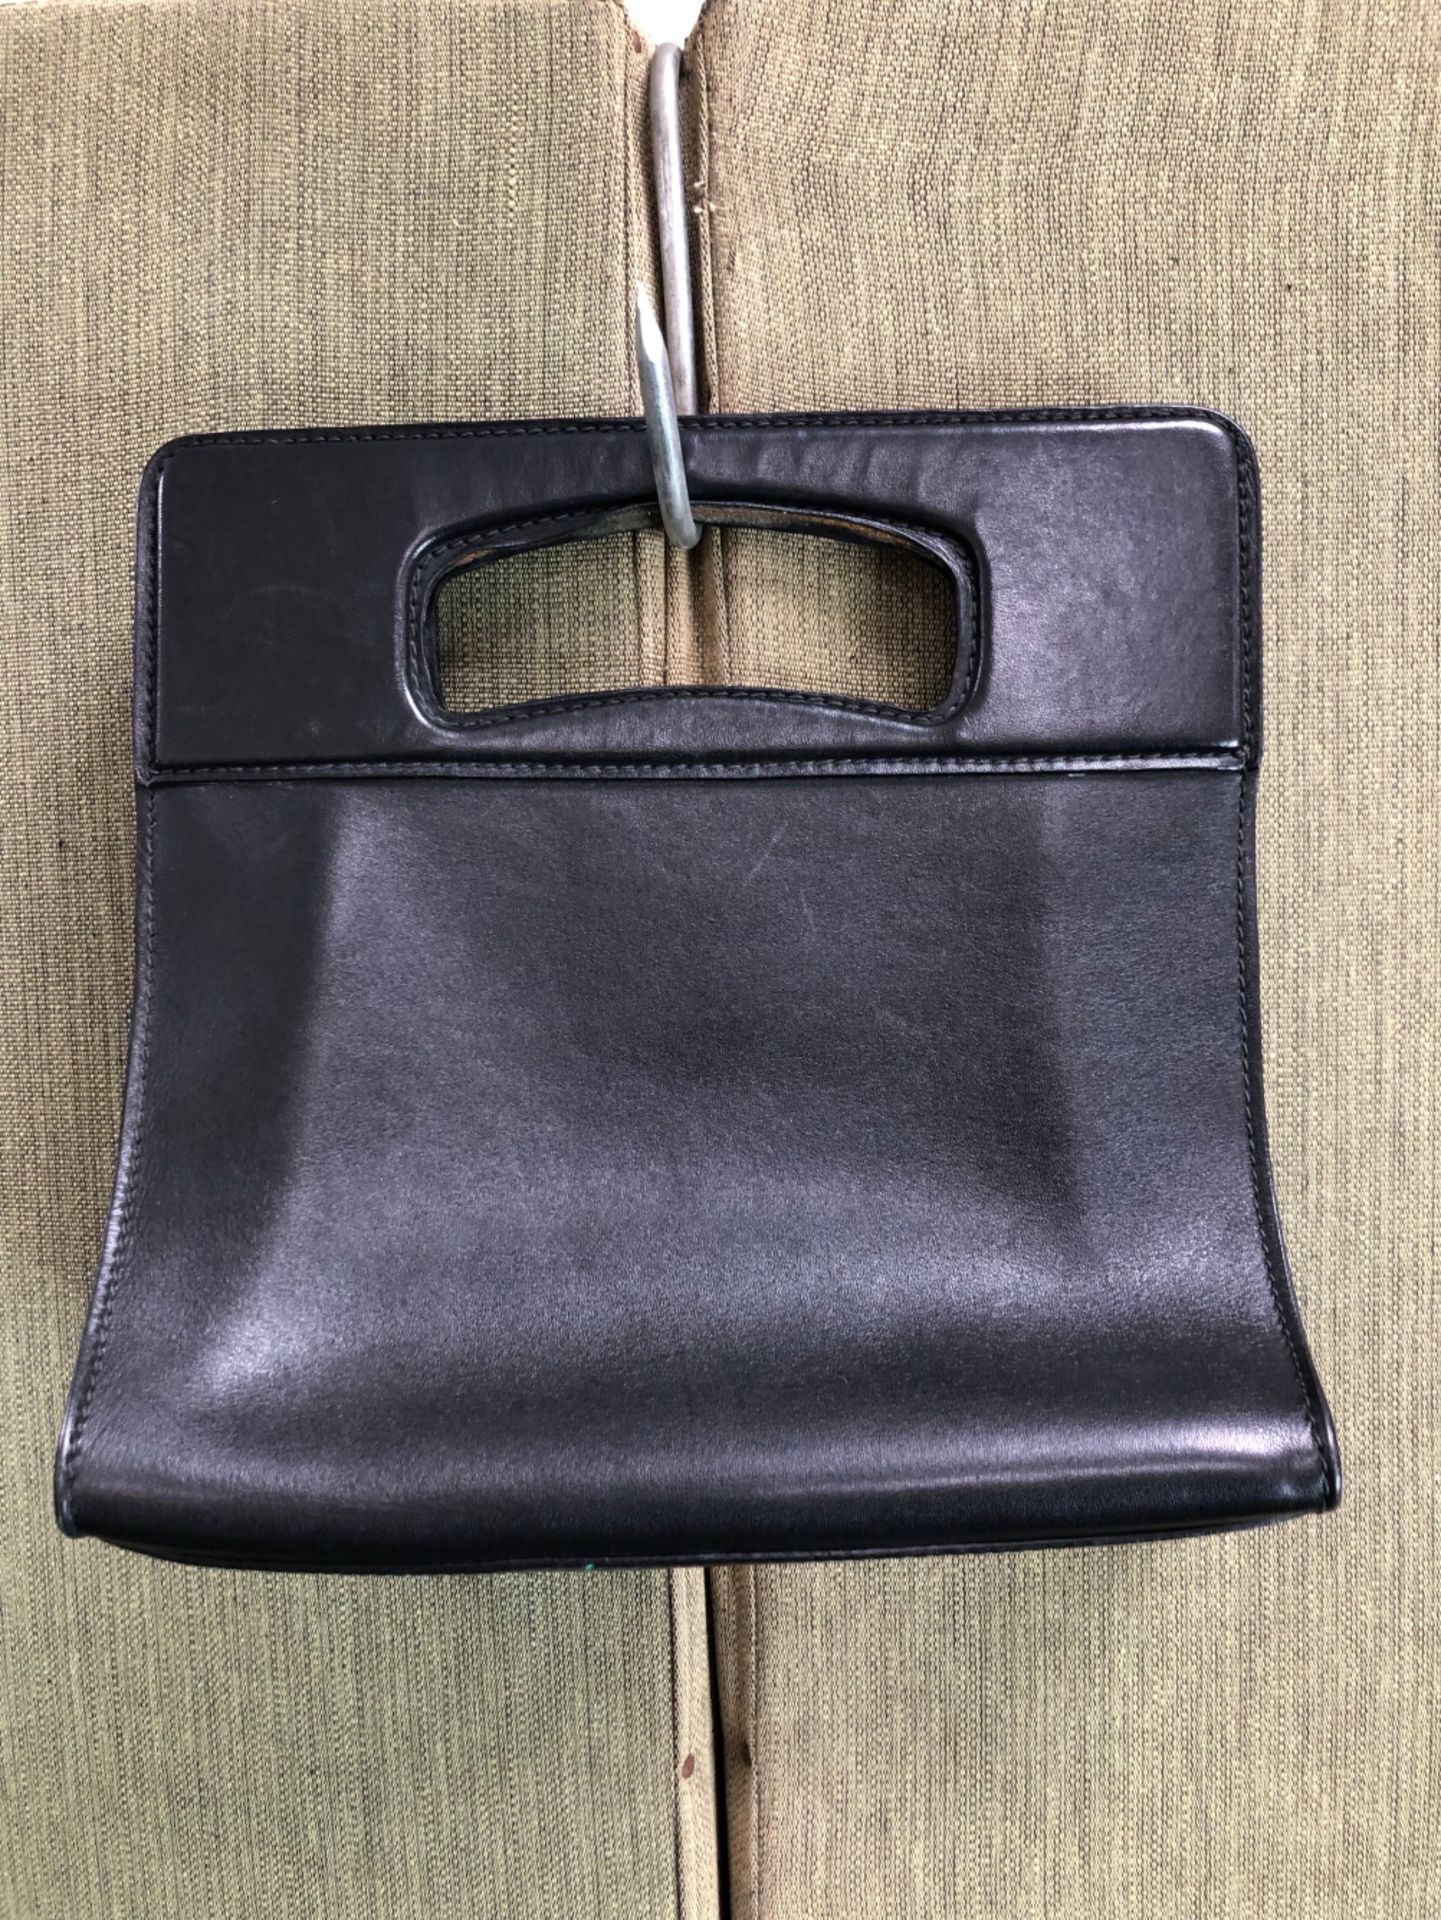 BAG. A GHERARDINI 1960's BLACK LEATHER SMALL BAG COMPLETE WITH DUST COVER. - Image 3 of 6